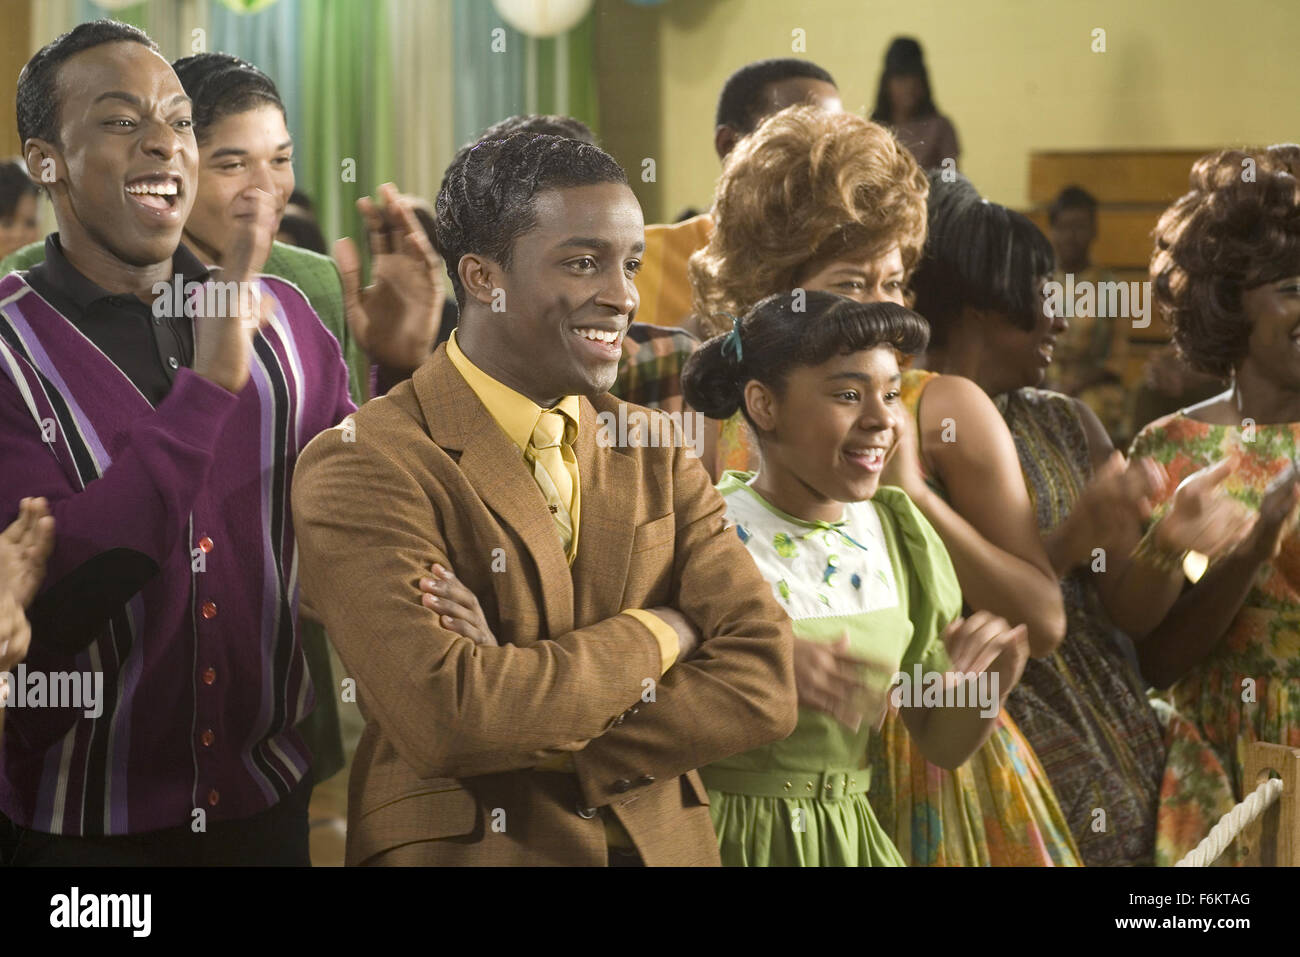 RELEASE DATE: July 20, 2007. MOVIE TITLE: Hairspray - STUDIO: Storyline Entertainment/New Line Cinema. PLOT: Pleasantly plump teenager Tracy Turnblad teaches 1962 Baltimore a thing or two about integration after landing a spot on a local TV dance show. PICTURED: ELIJAH KELLEY, SARAH FRANCIS. Stock Photo